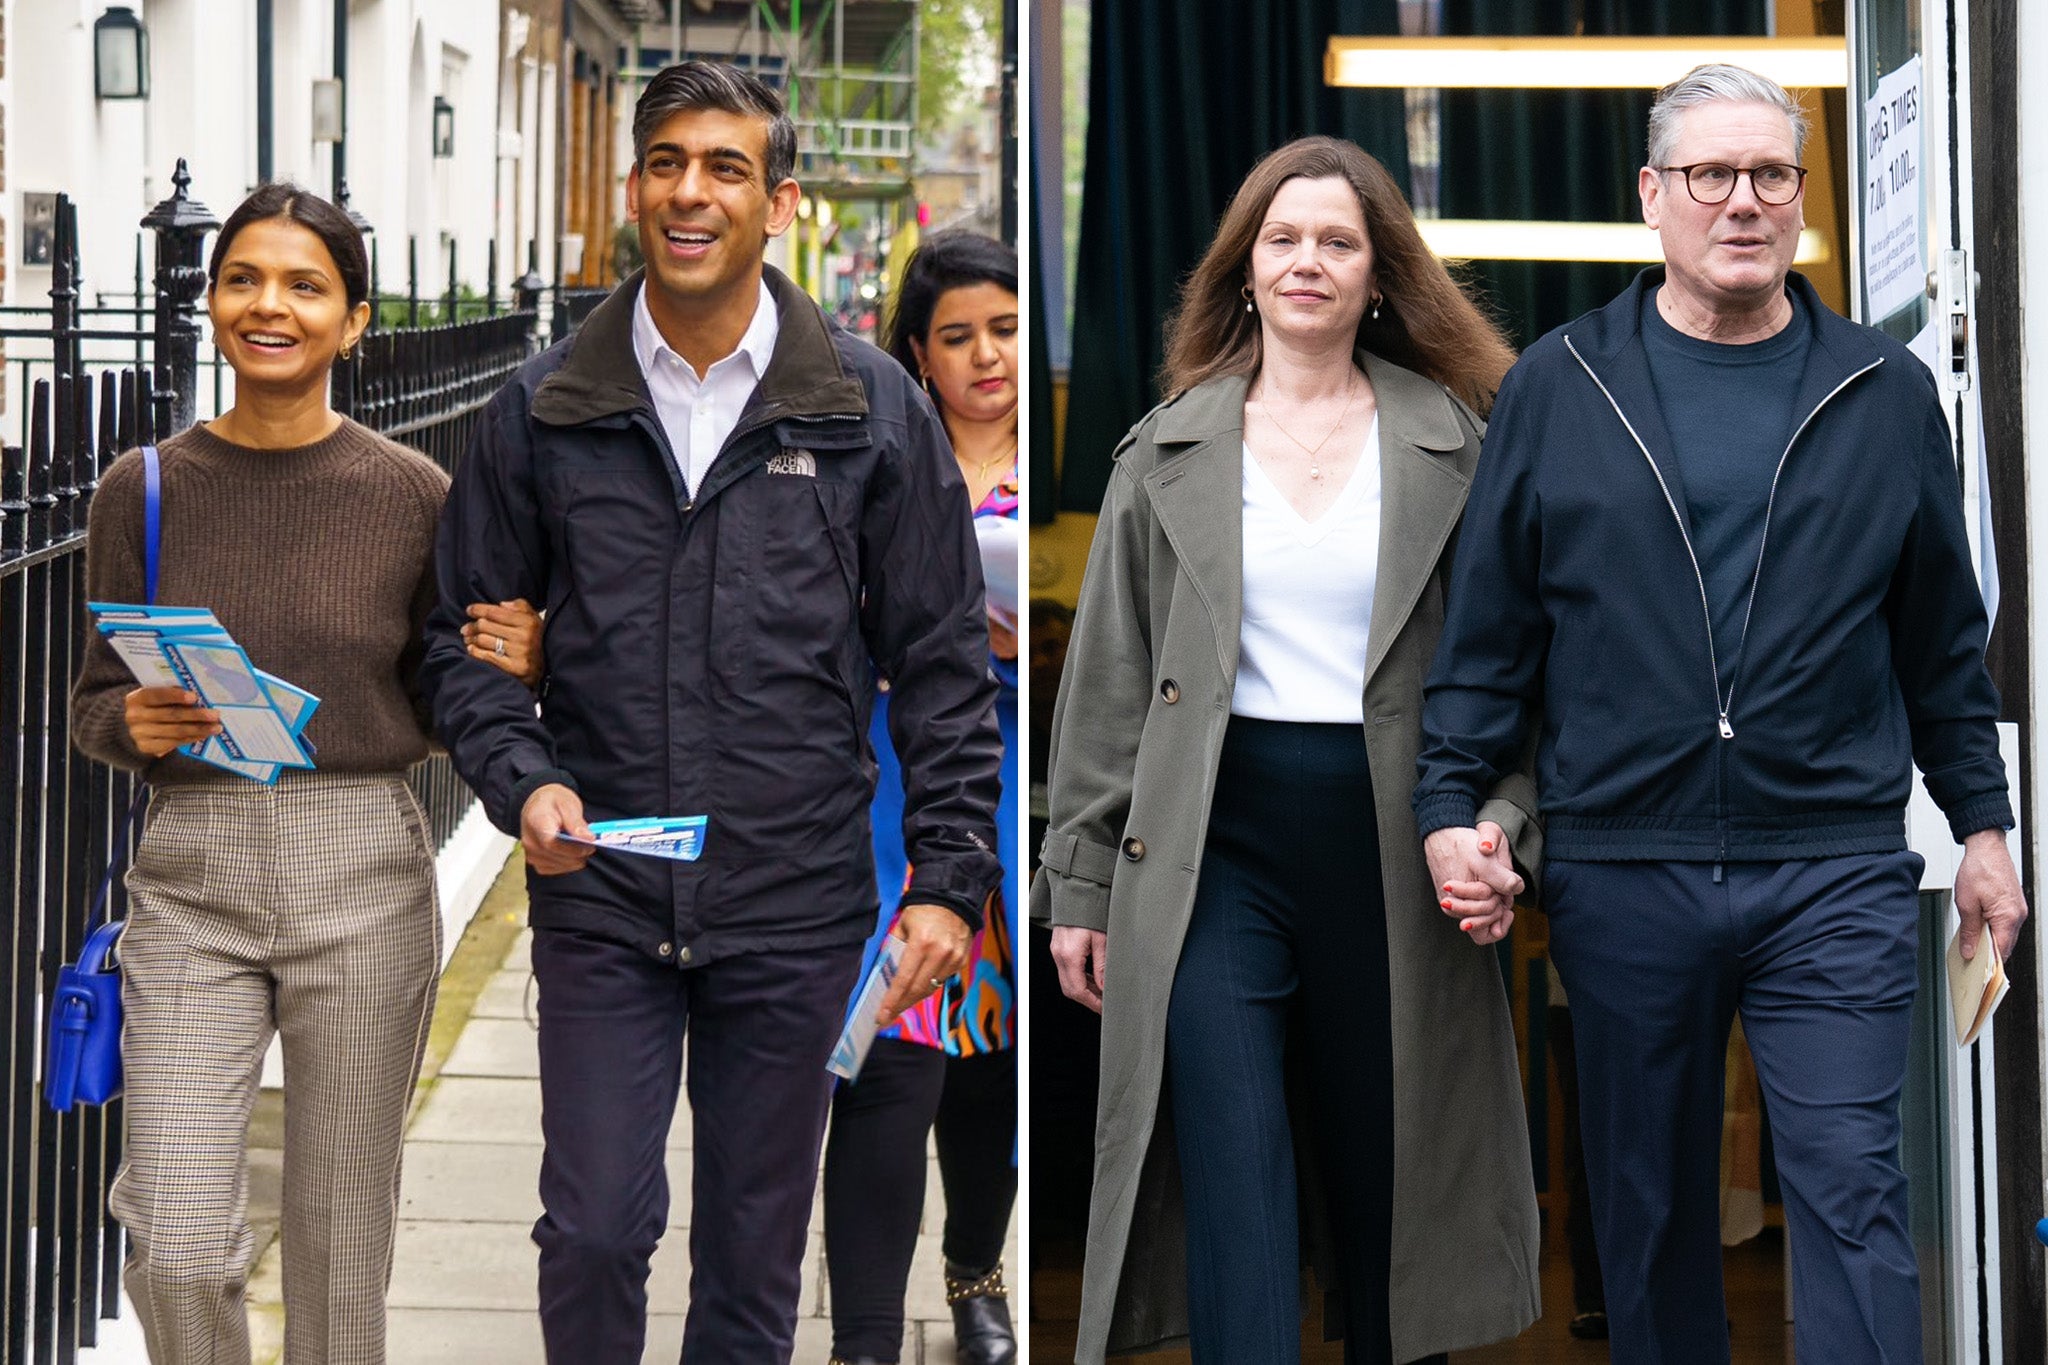 Rishi Sunak and Akshata Murty canvass, and Labour leader Sir Keir Starmer and his wife Victoria cast their votes